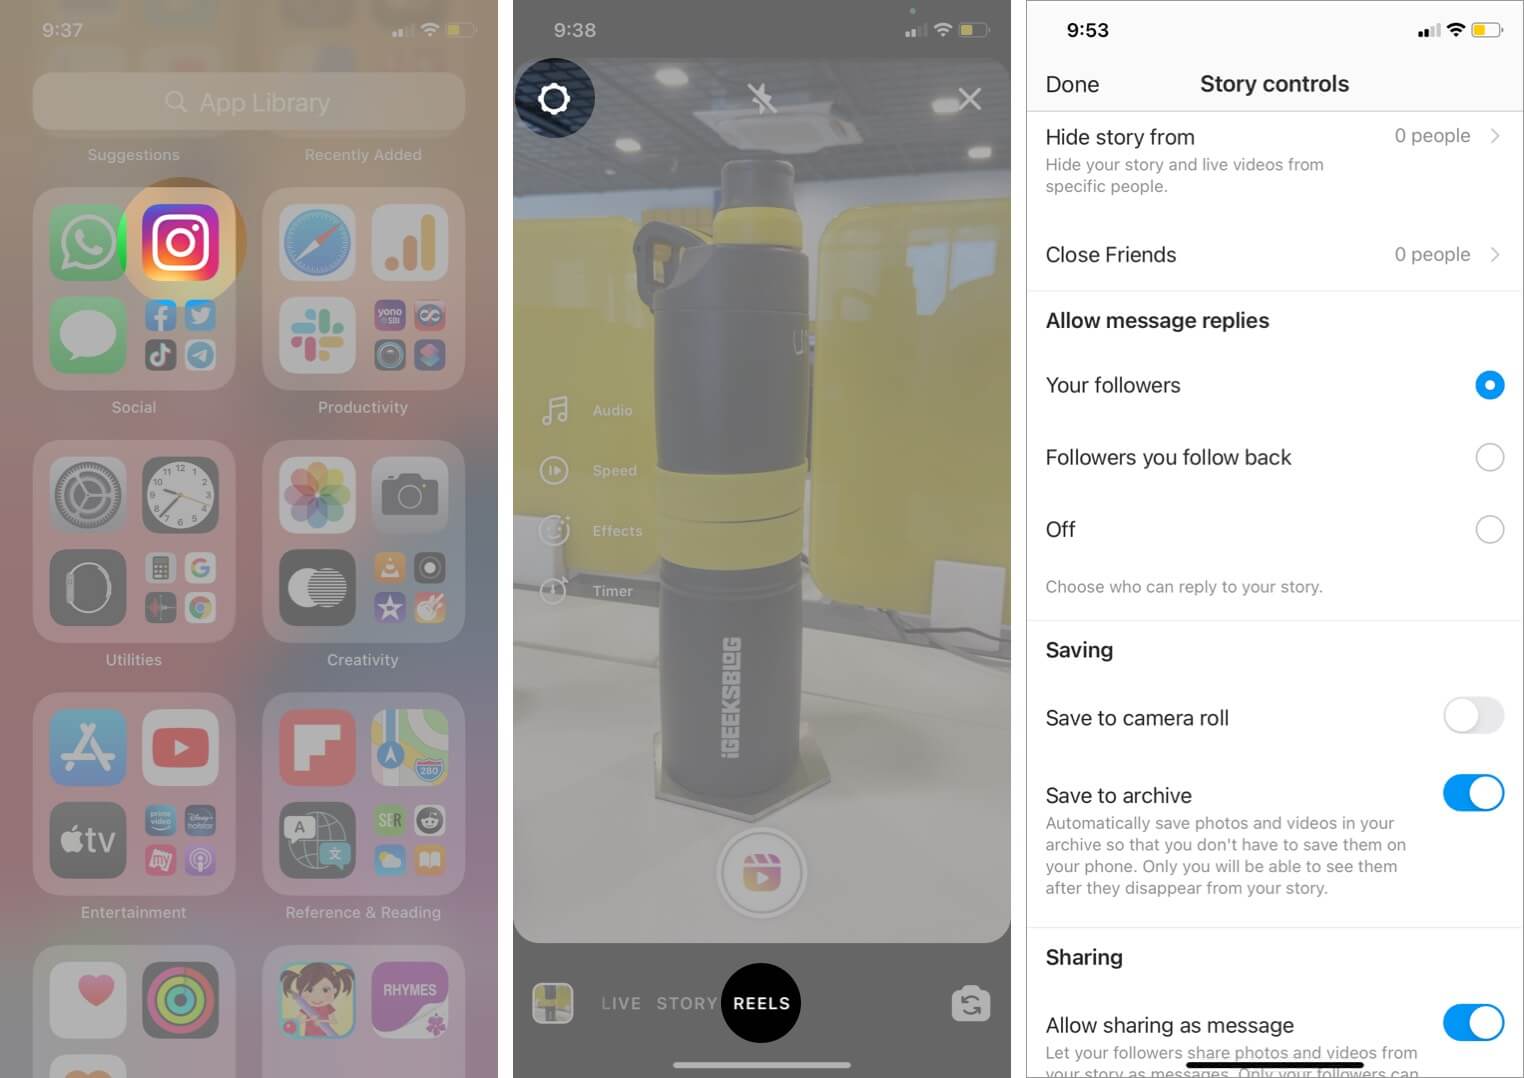 set reels privacy and sharing settings in instagram on iphone